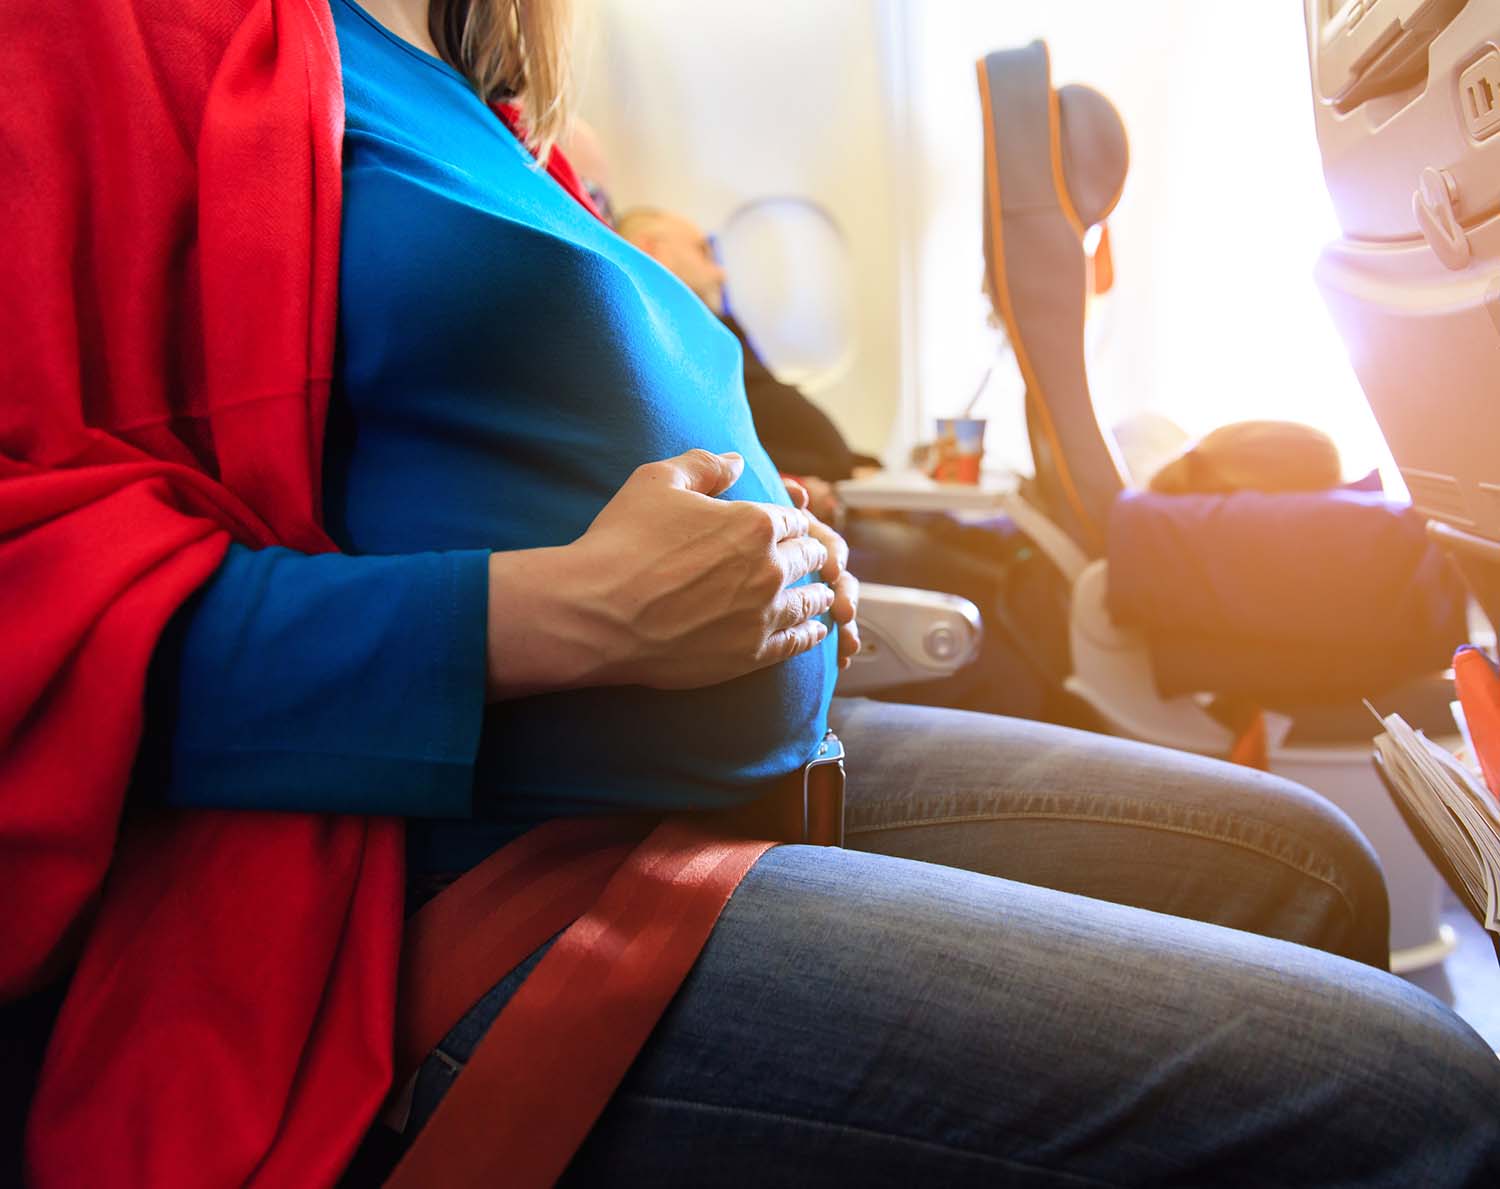 travel insurance to usa while pregnant